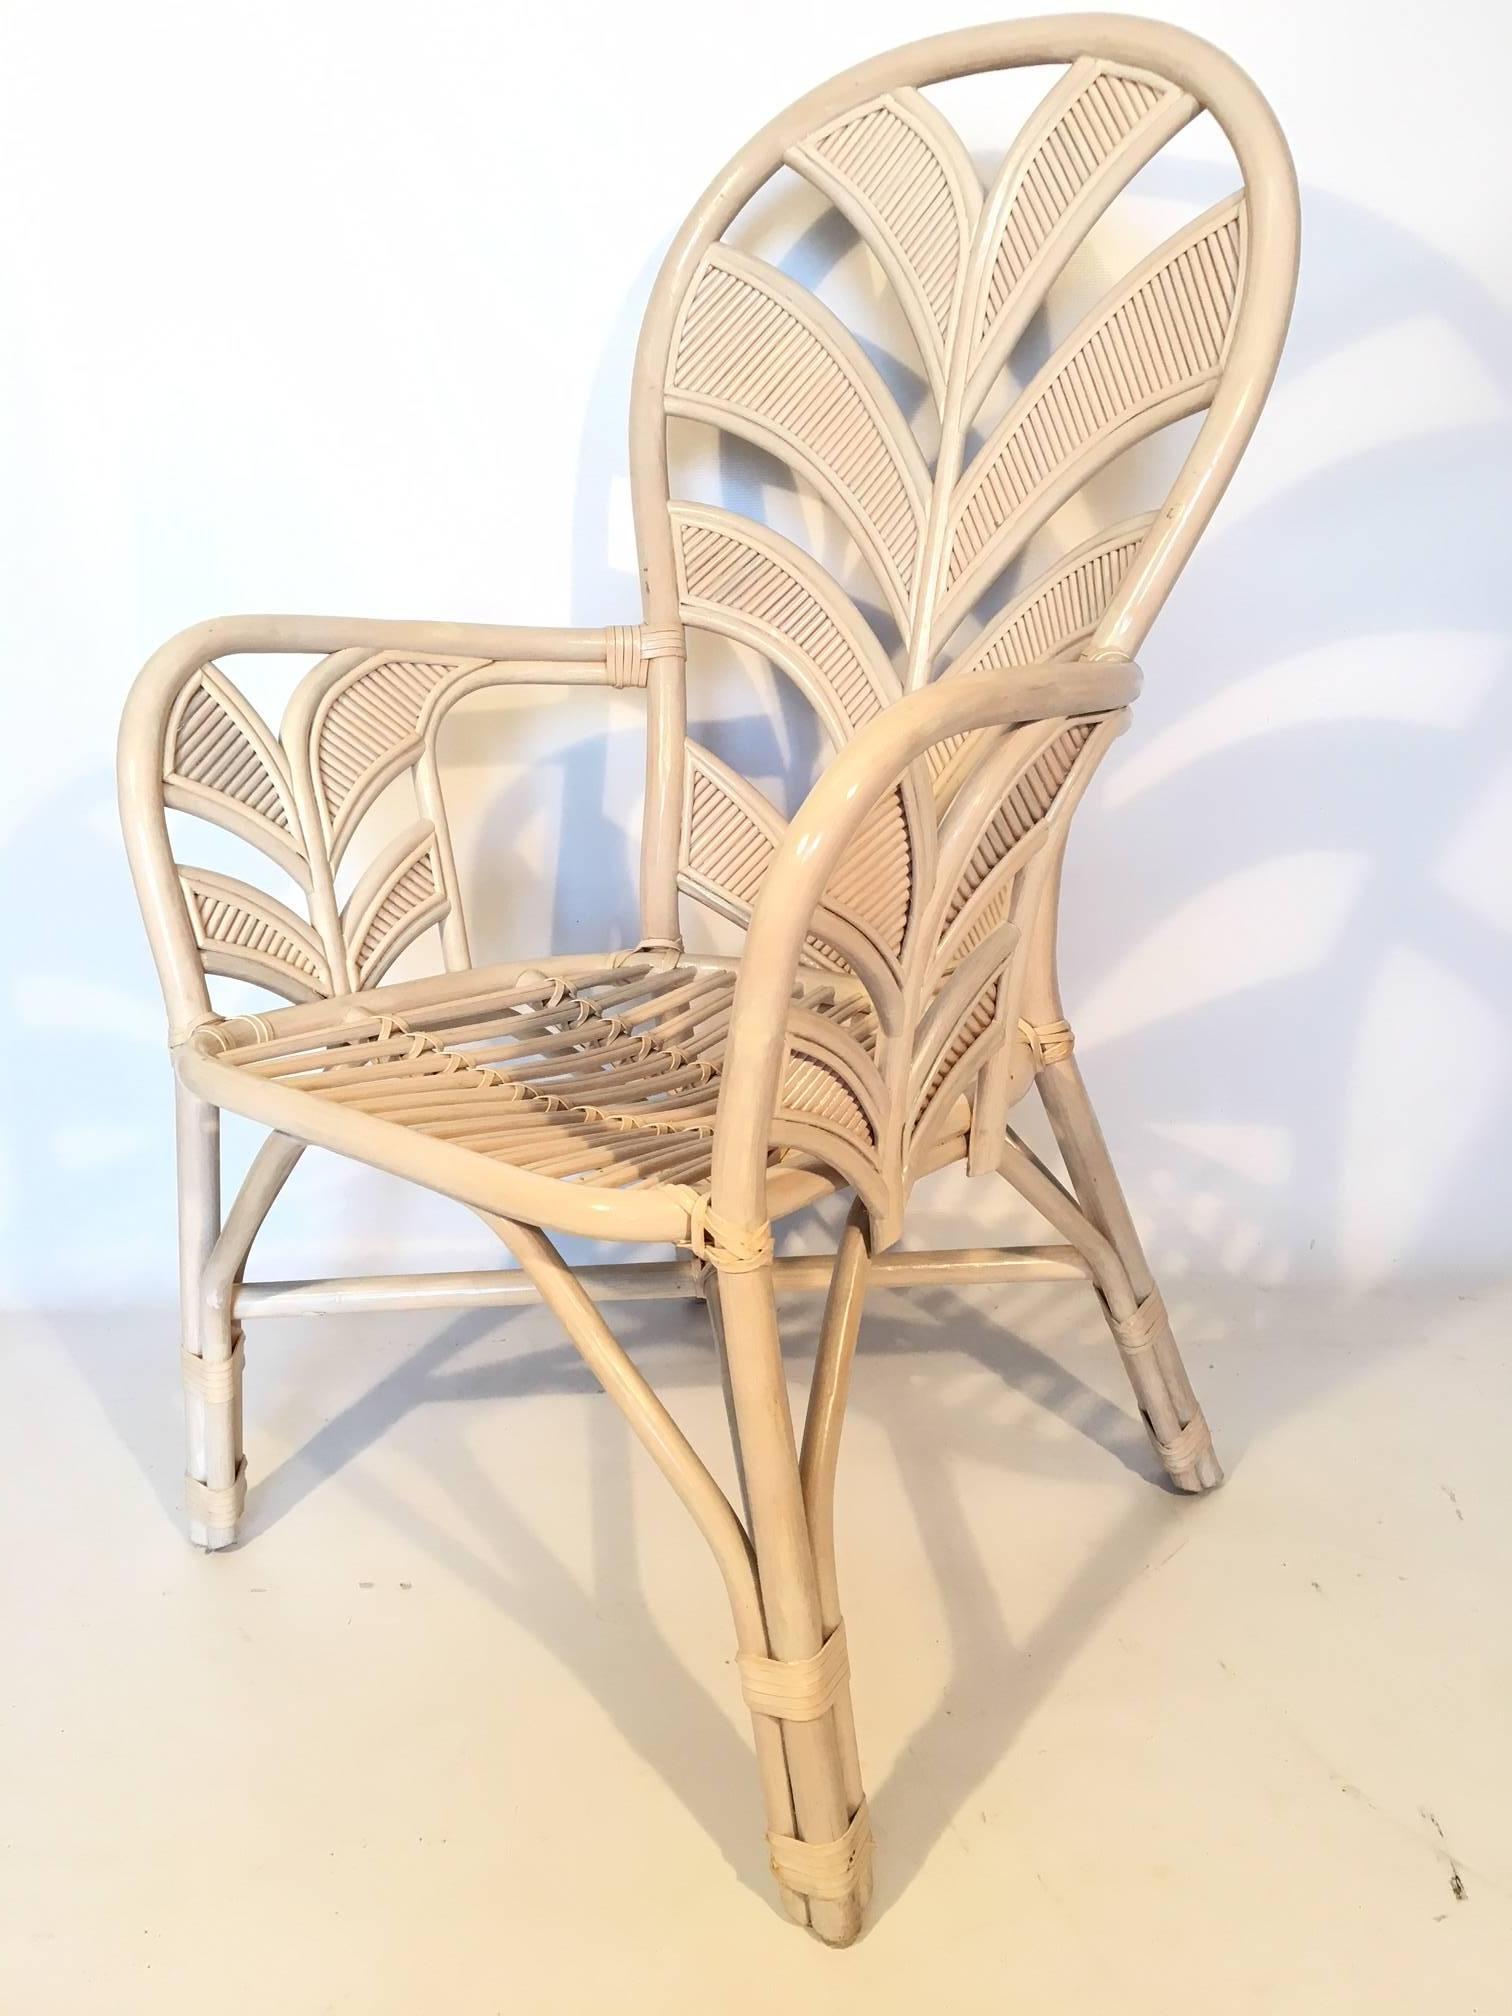 Midcentury rattan arm chairs feature sculptural palm frond motif for a touch of vintage Palm Beach style in any decor. Excellent condition both structurally and cosmetically. Chairs can be purchased individually in any quantity (ten available). Six